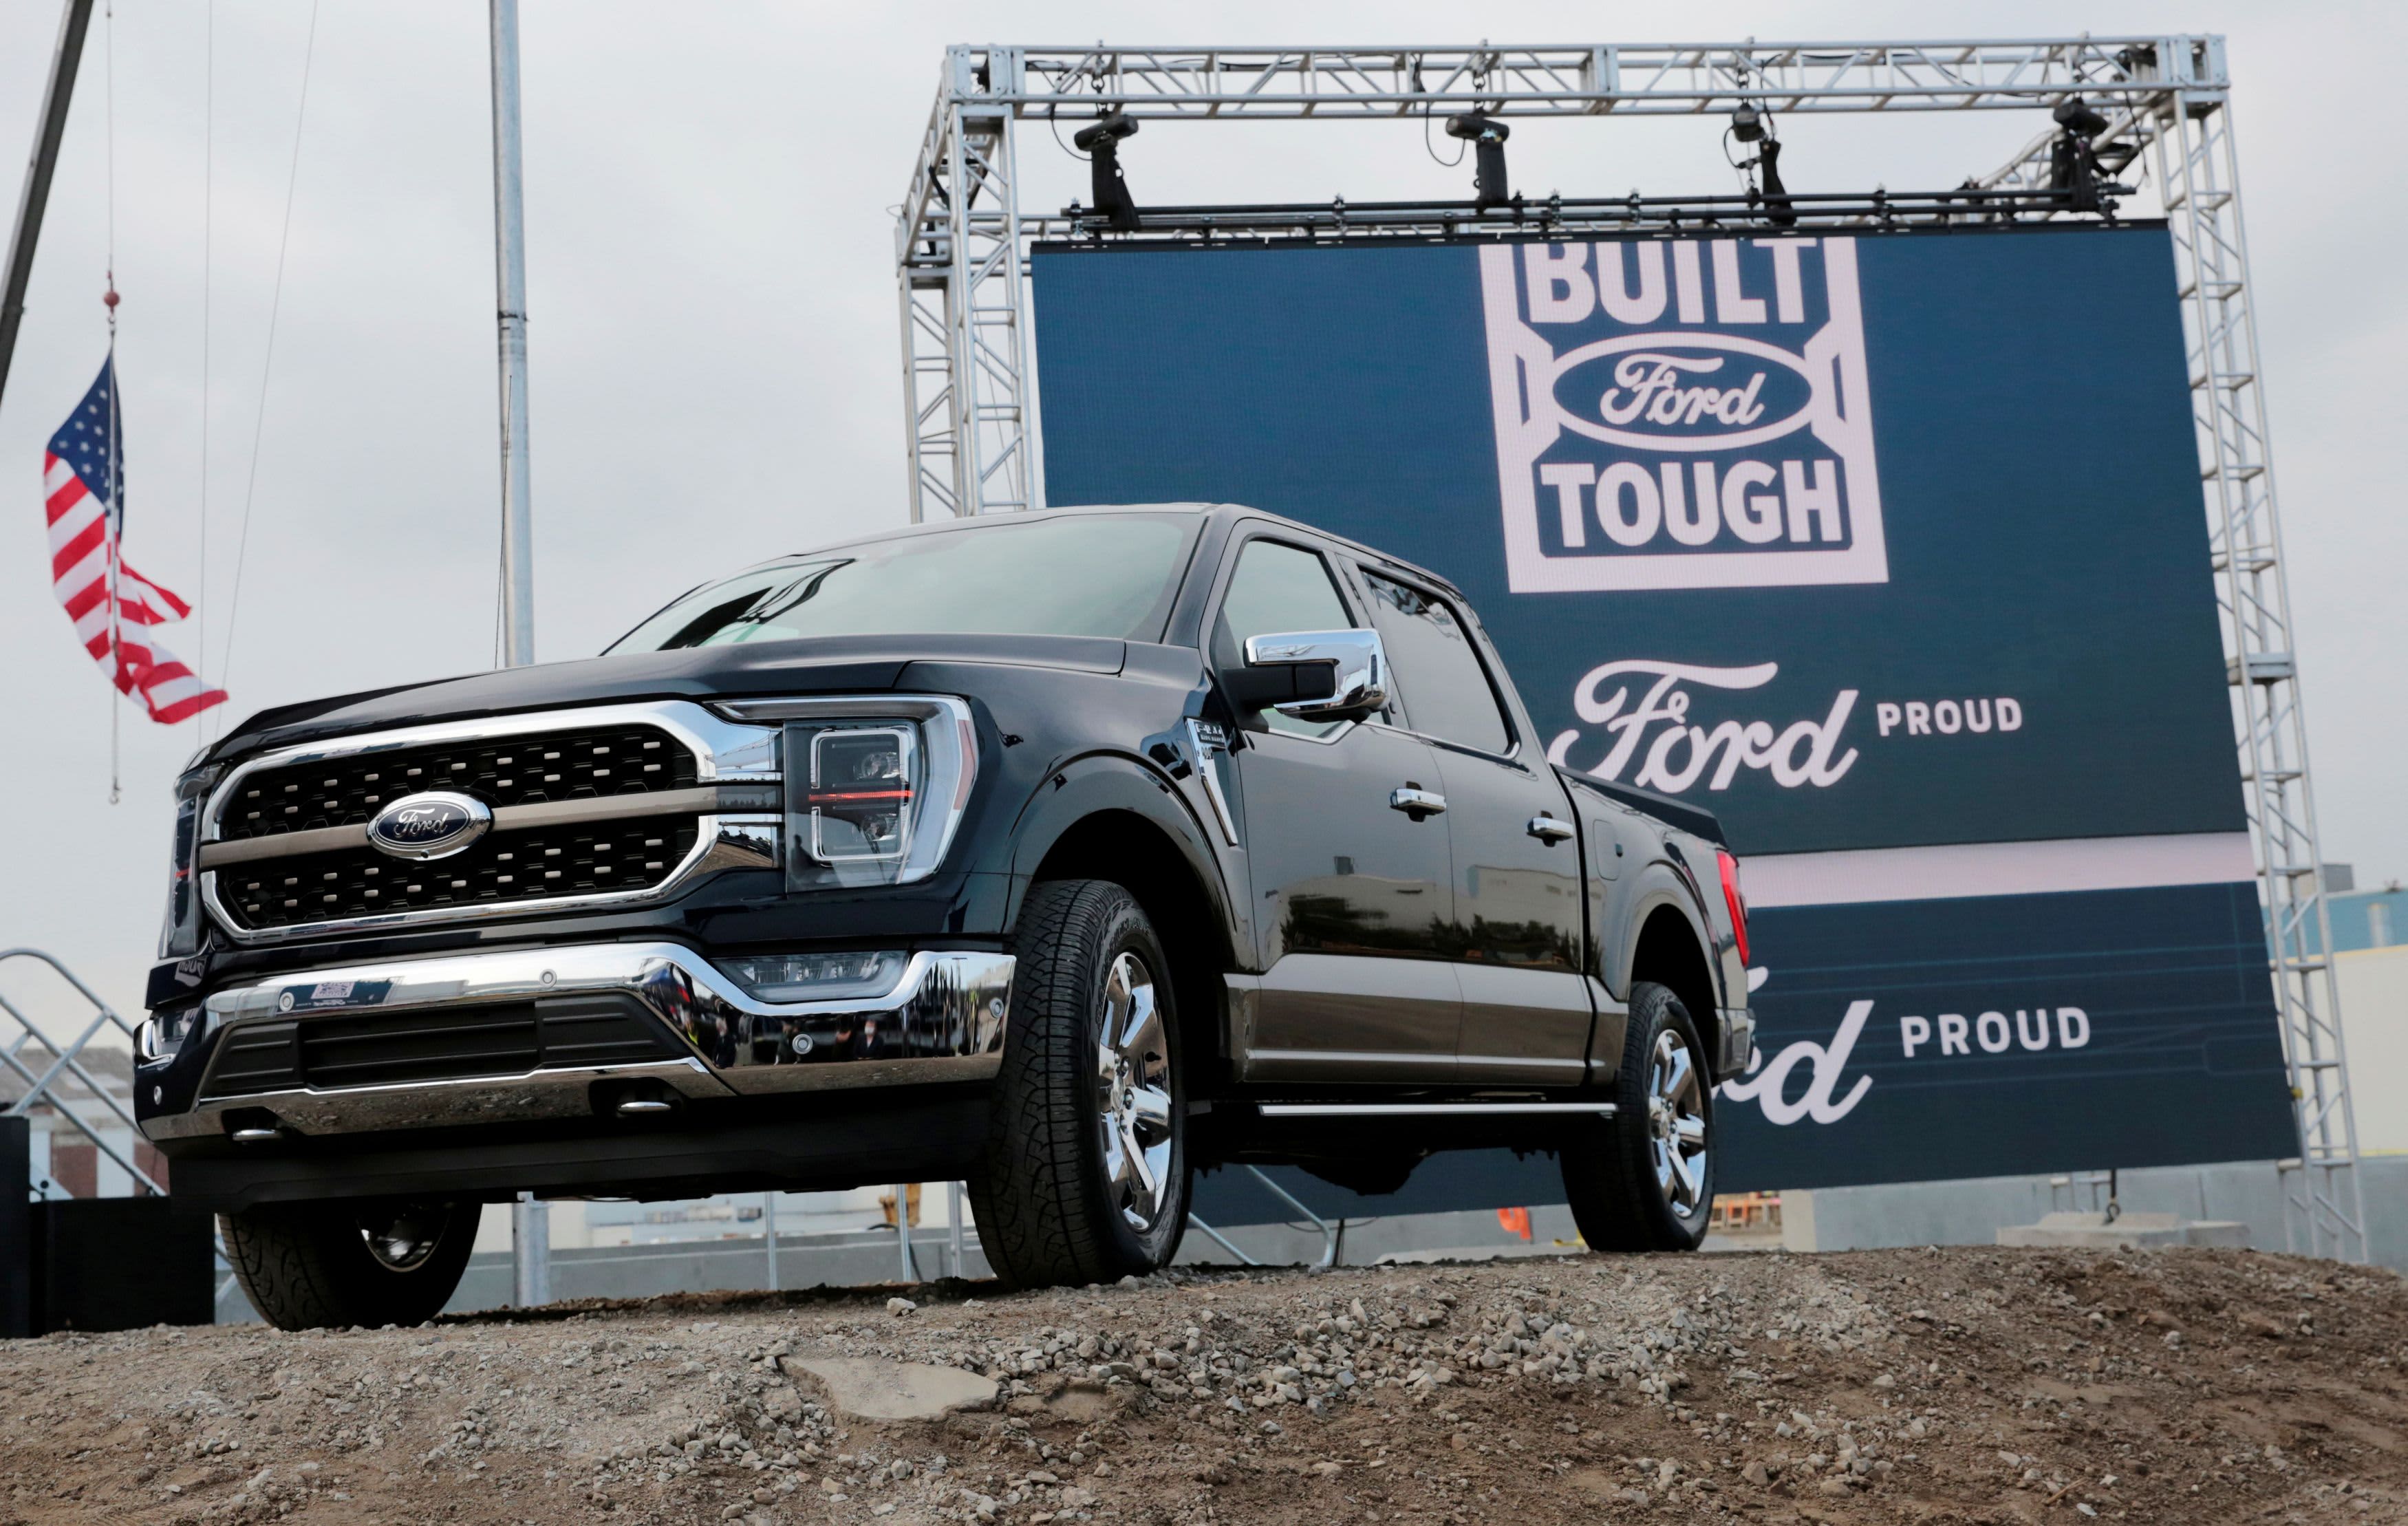 Ford pickup continues to be America’s best-promoting truck for 45th yr, automaker claims